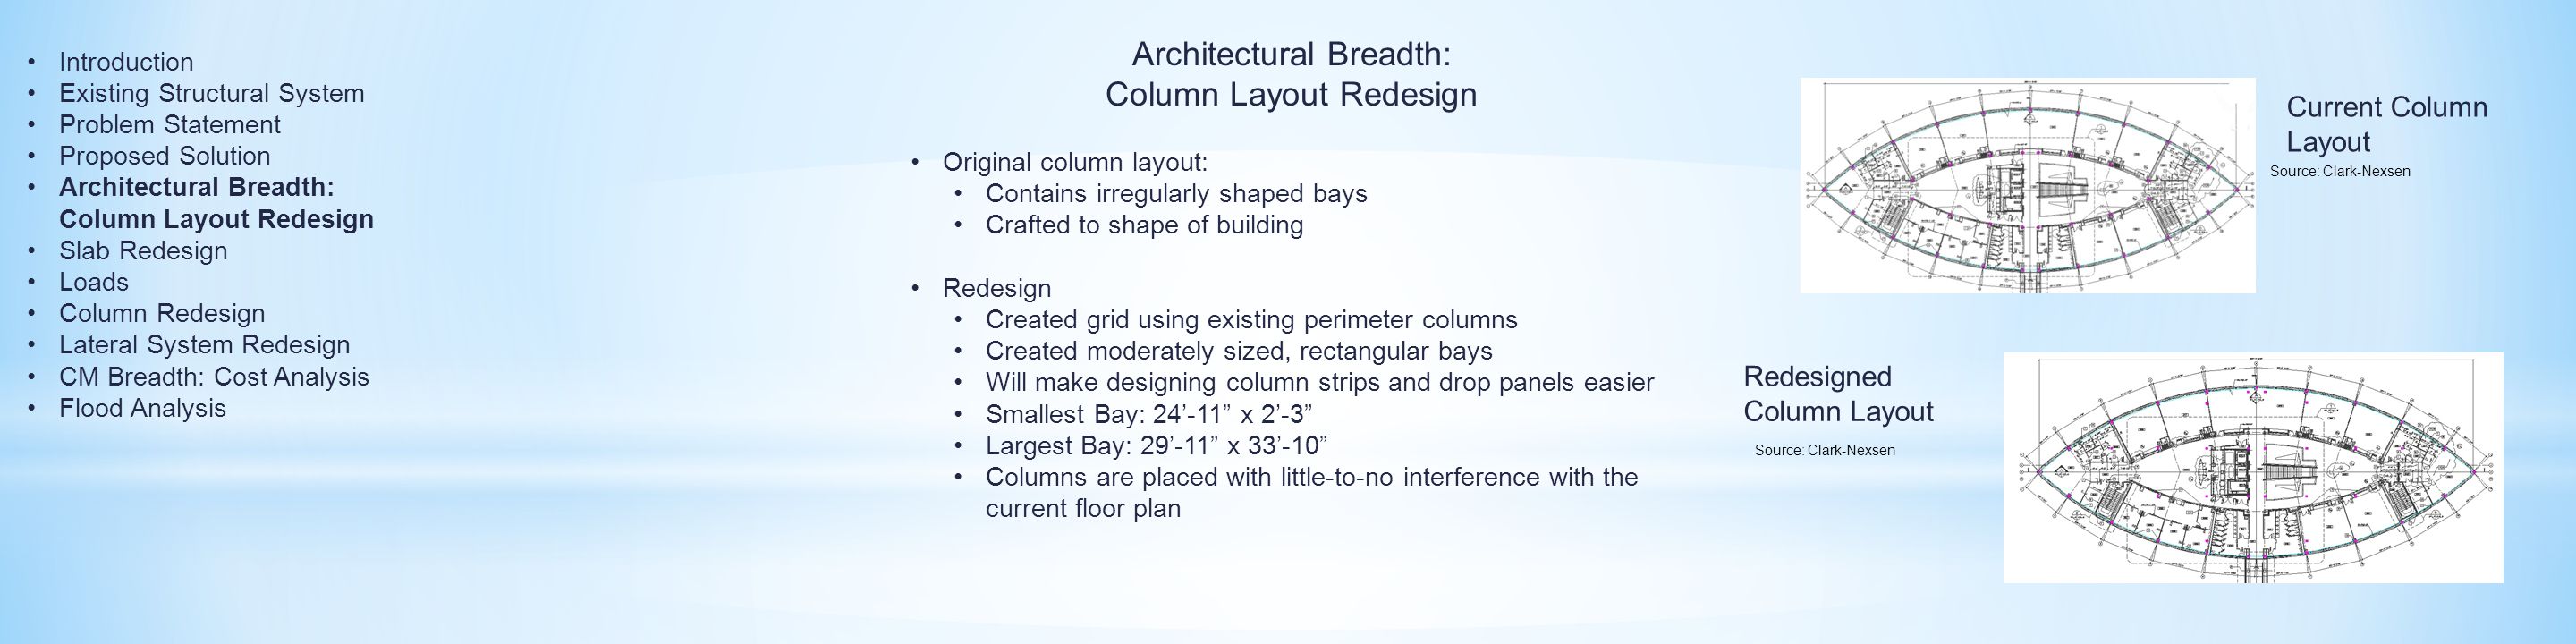 Architectural Breadth: Column Layout Redesign Current Column Layout Redesigned Column Layout Original column layout: Contains irregularly shaped bays Crafted to shape of building Redesign Created grid using existing perimeter columns Created moderately sized, rectangular bays Will make designing column strips and drop panels easier Smallest Bay: 24’-11 x 2’-3 Largest Bay: 29’-11 x 33’-10 Columns are placed with little-to-no interference with the current floor plan Introduction Existing Structural System Problem Statement Proposed Solution Architectural Breadth: Column Layout Redesign Slab Redesign Loads Column Redesign Lateral System Redesign CM Breadth: Cost Analysis Flood Analysis Source: Clark-Nexsen